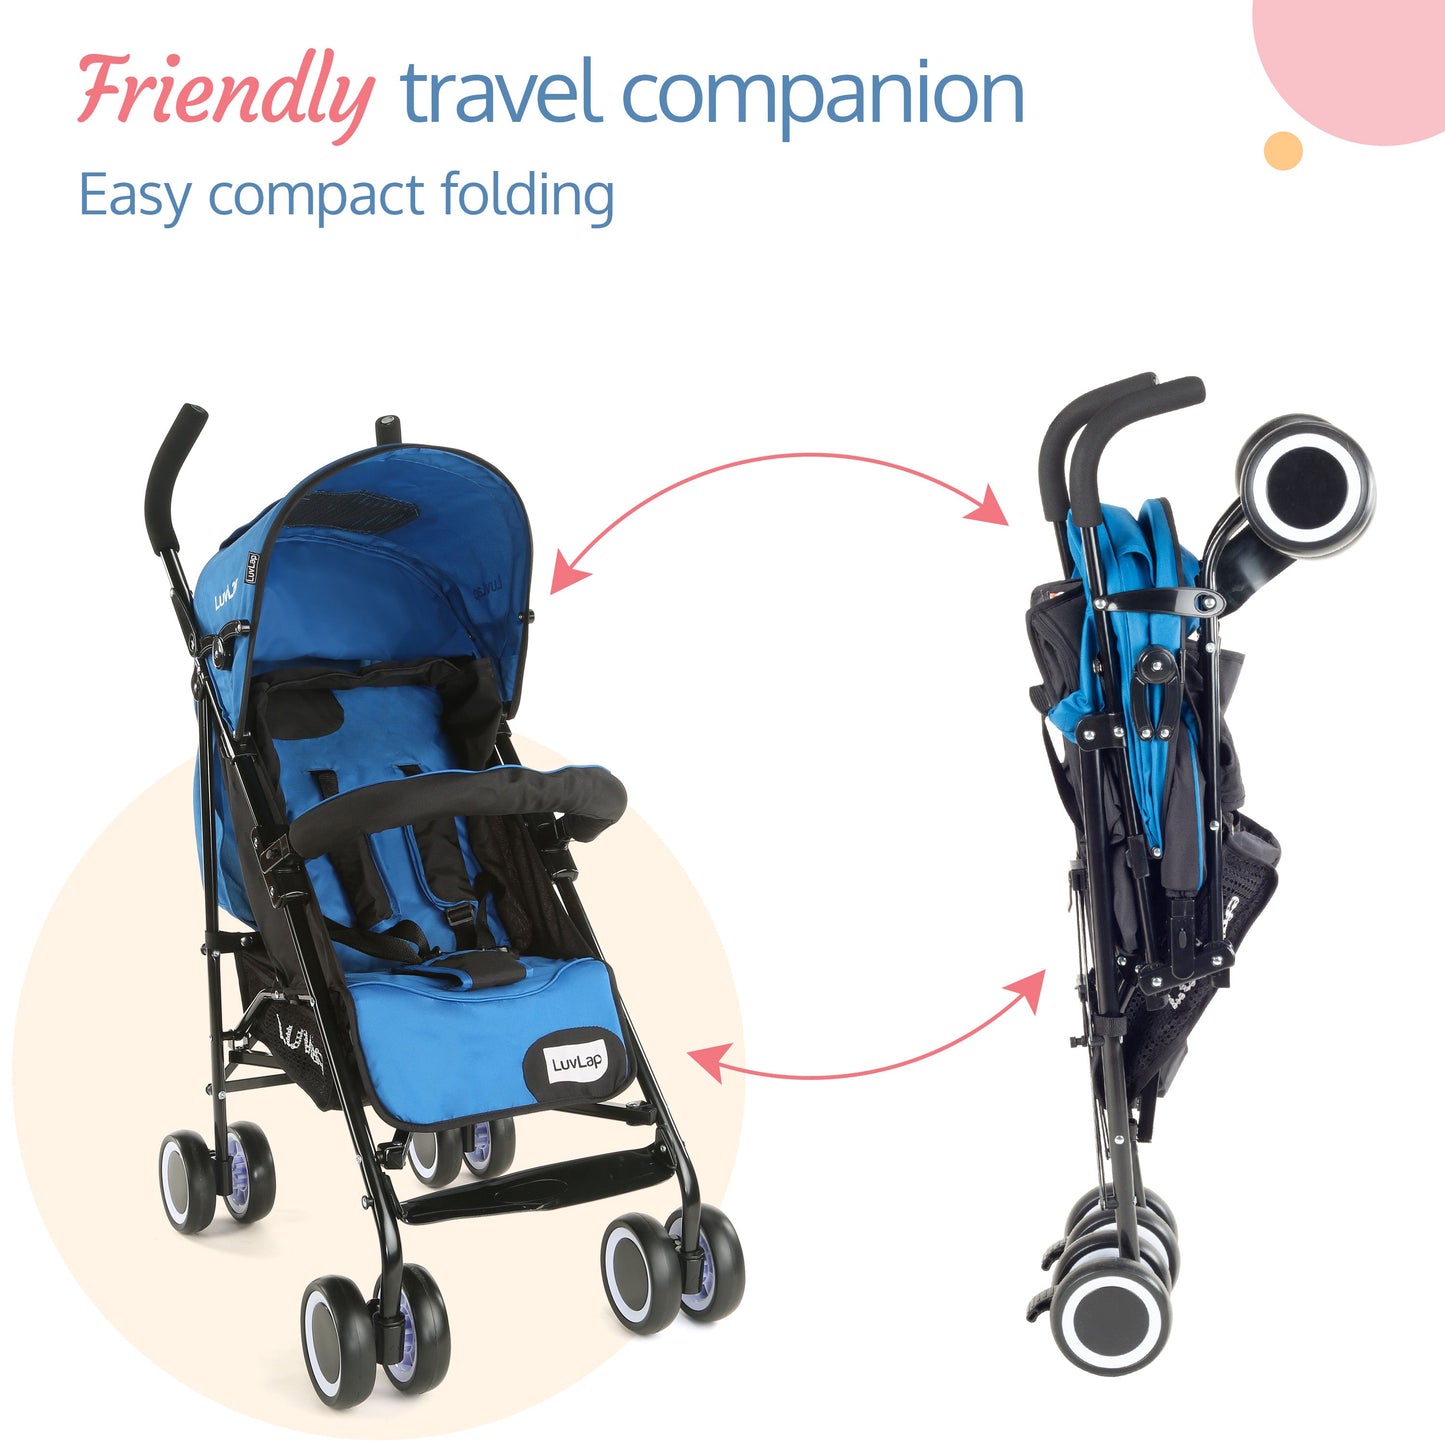 City Baby Stroller Buggy, Blue